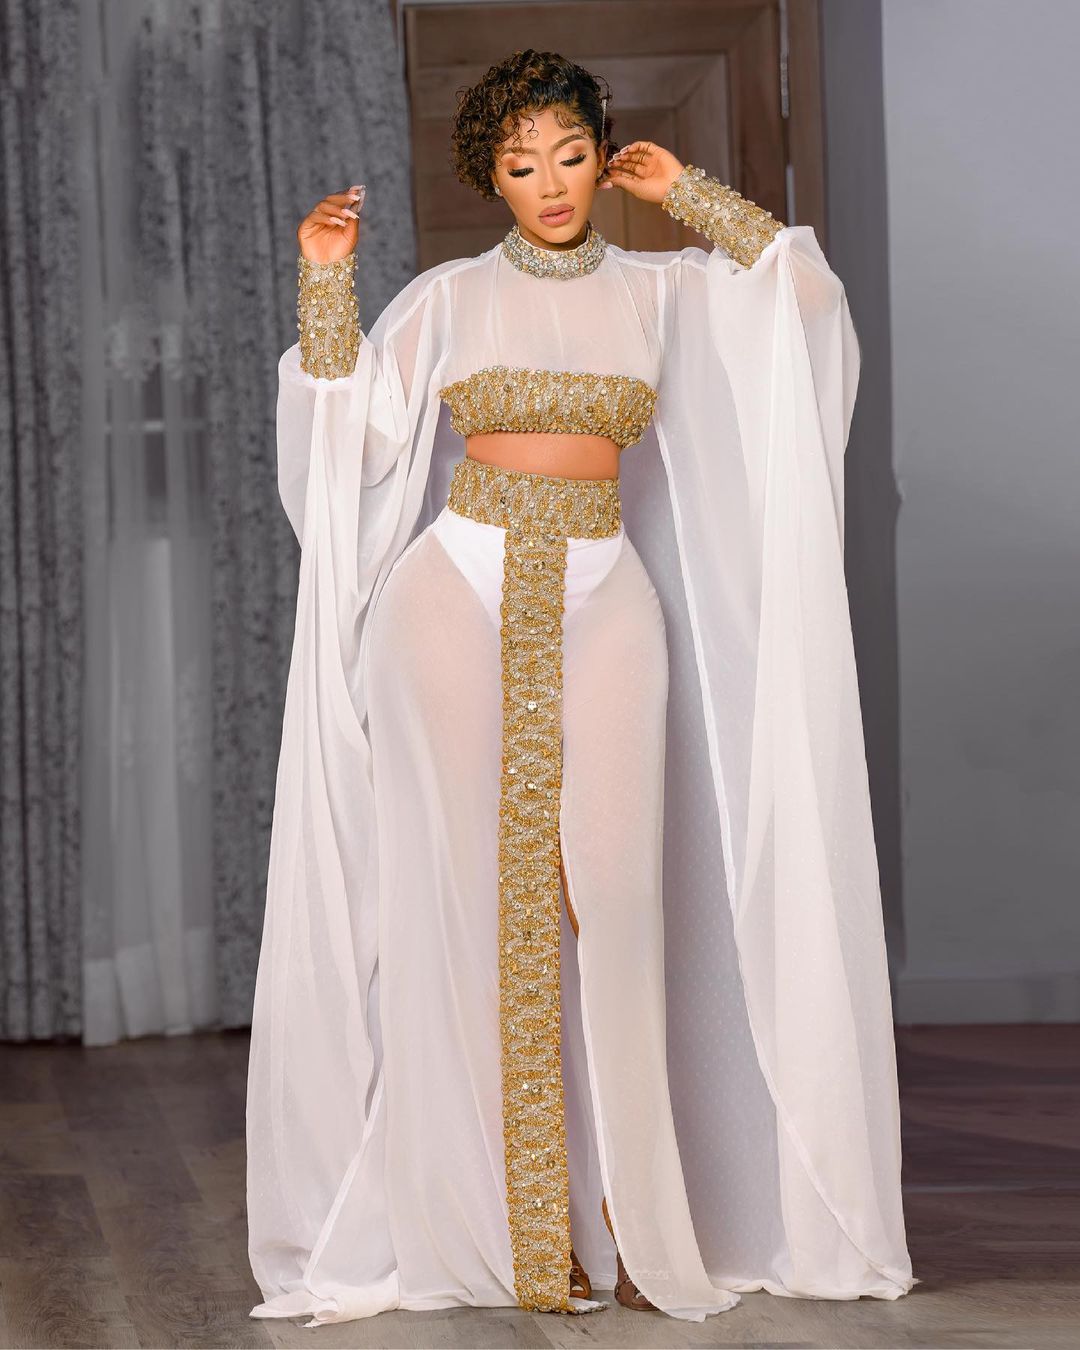 Mercy Eke- Rocking Jaw-Dropping Outfit